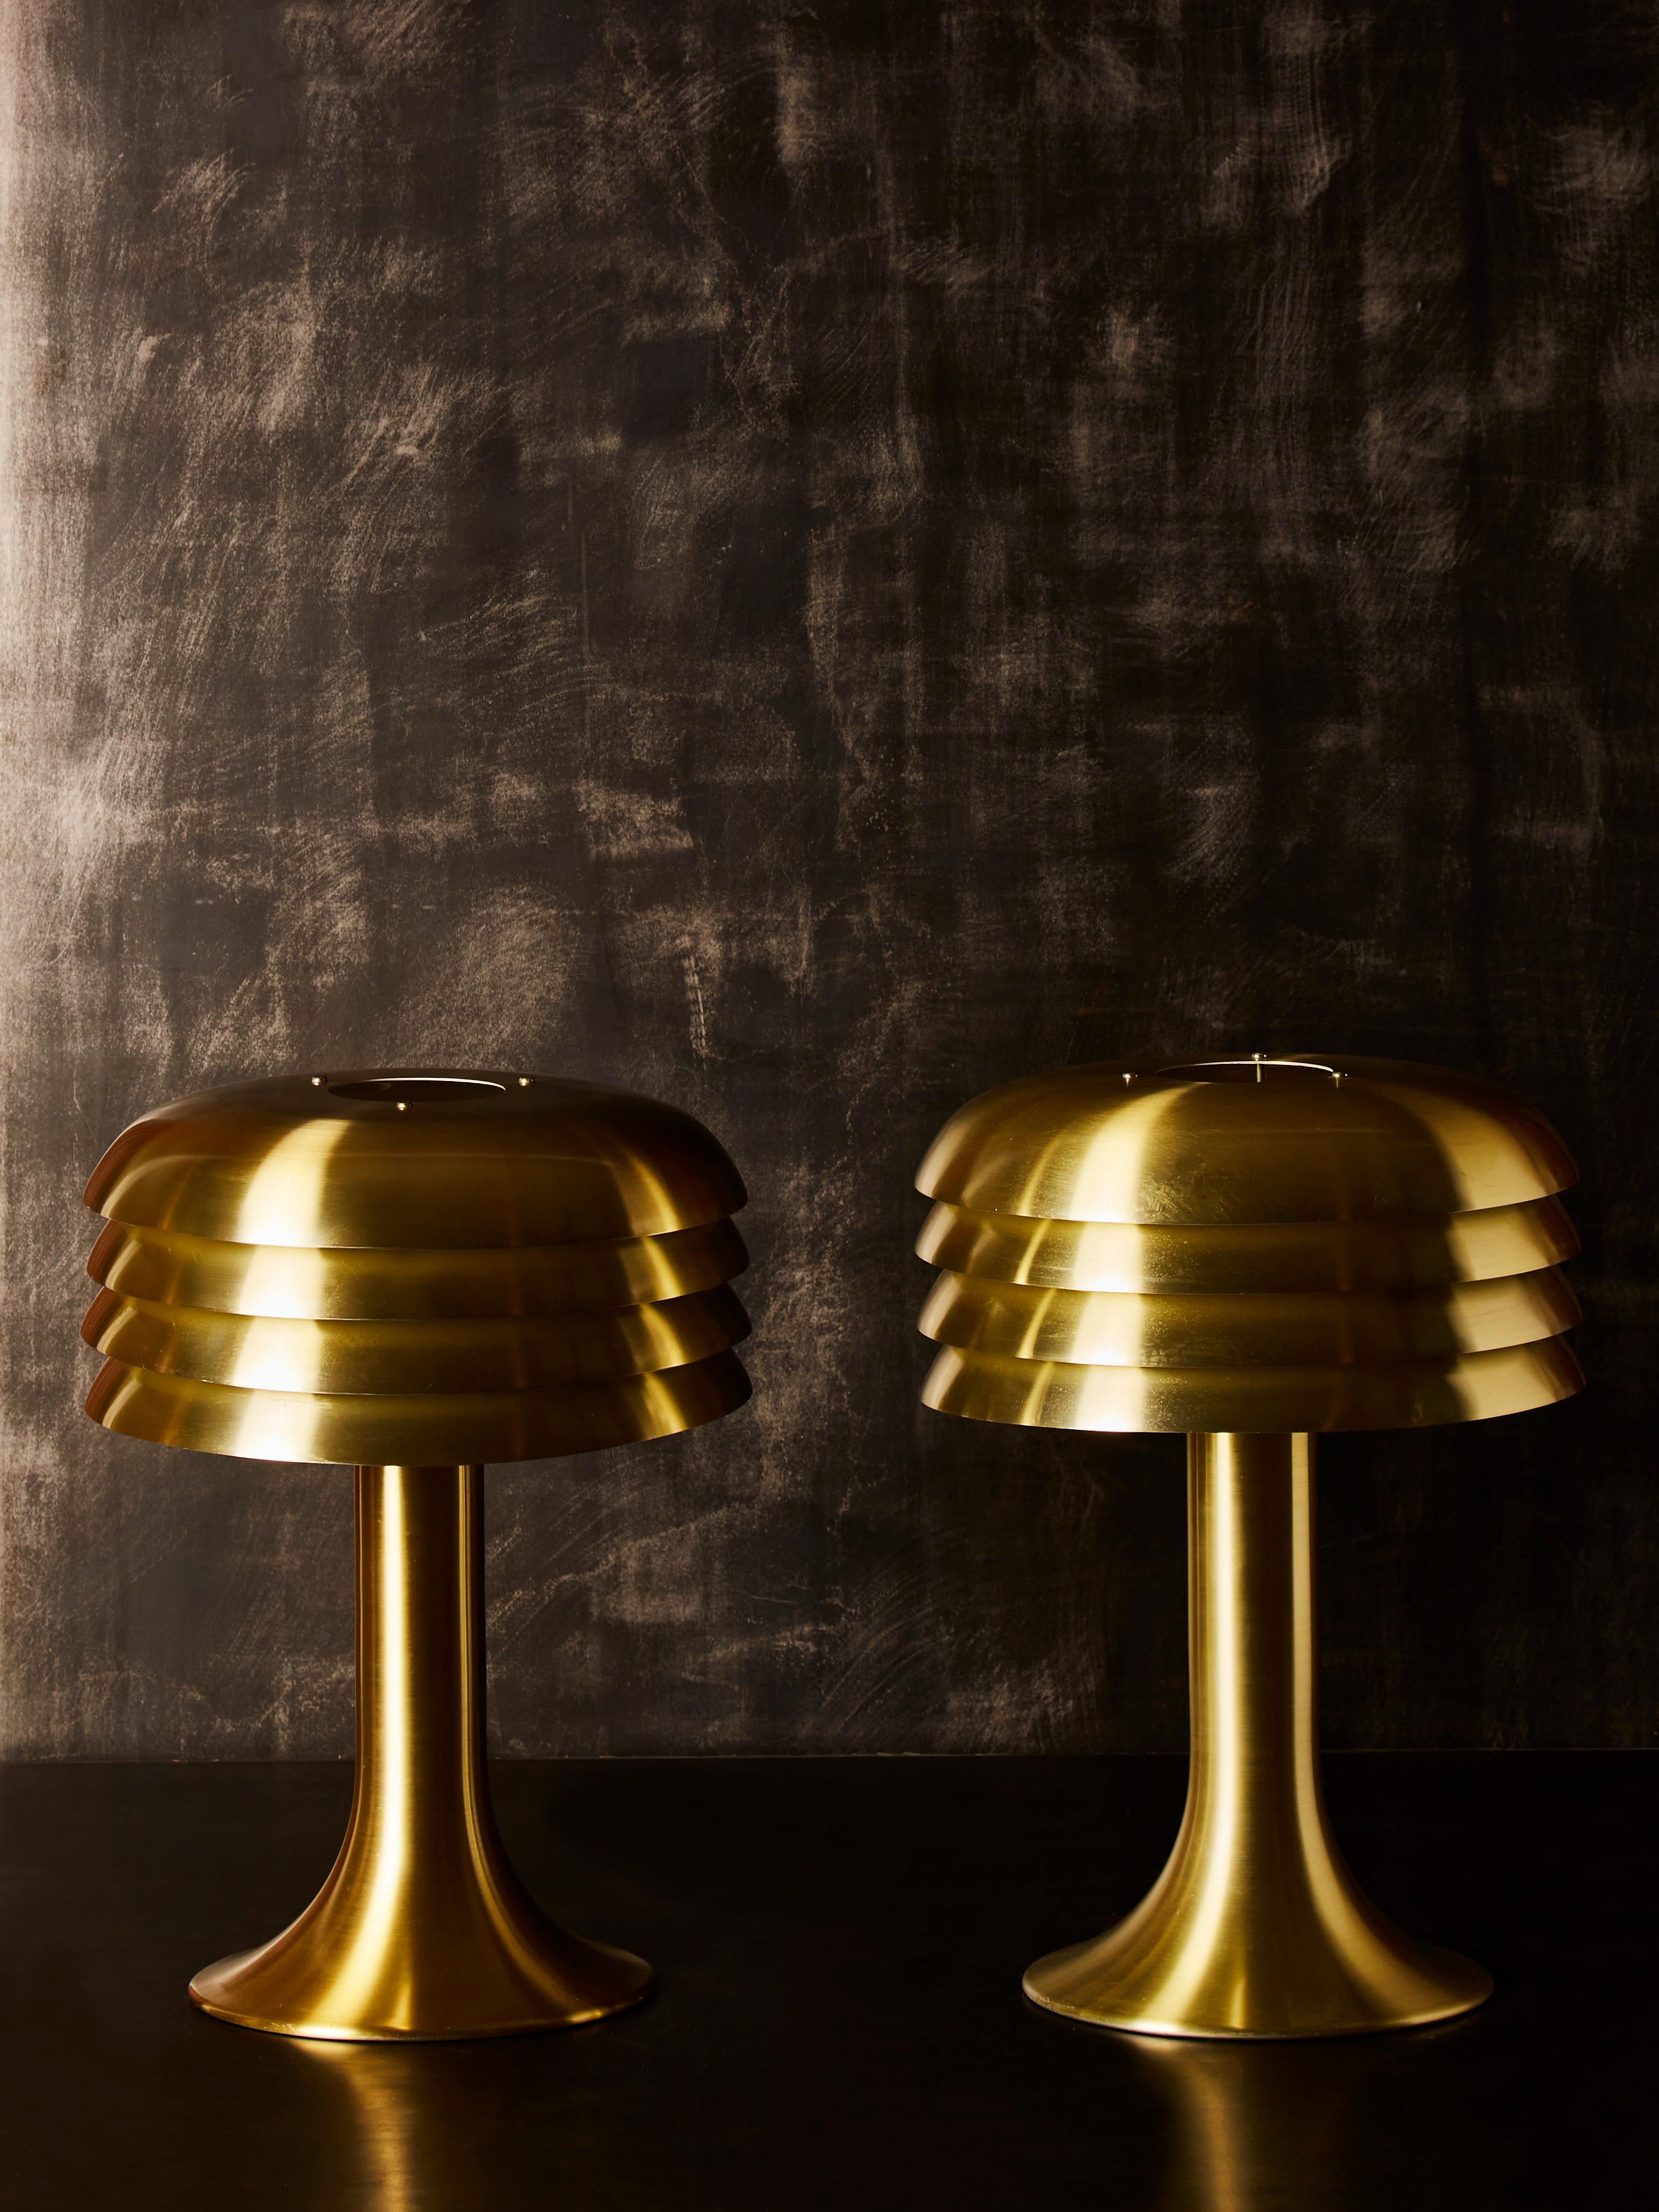 Pair of brass table lamps model BN 26 designed and produced by Hans Agne Jakobsson in the 1960s.

Made of a conical foot, and a lampshade made of four stacked curved layers letting the light go in between.